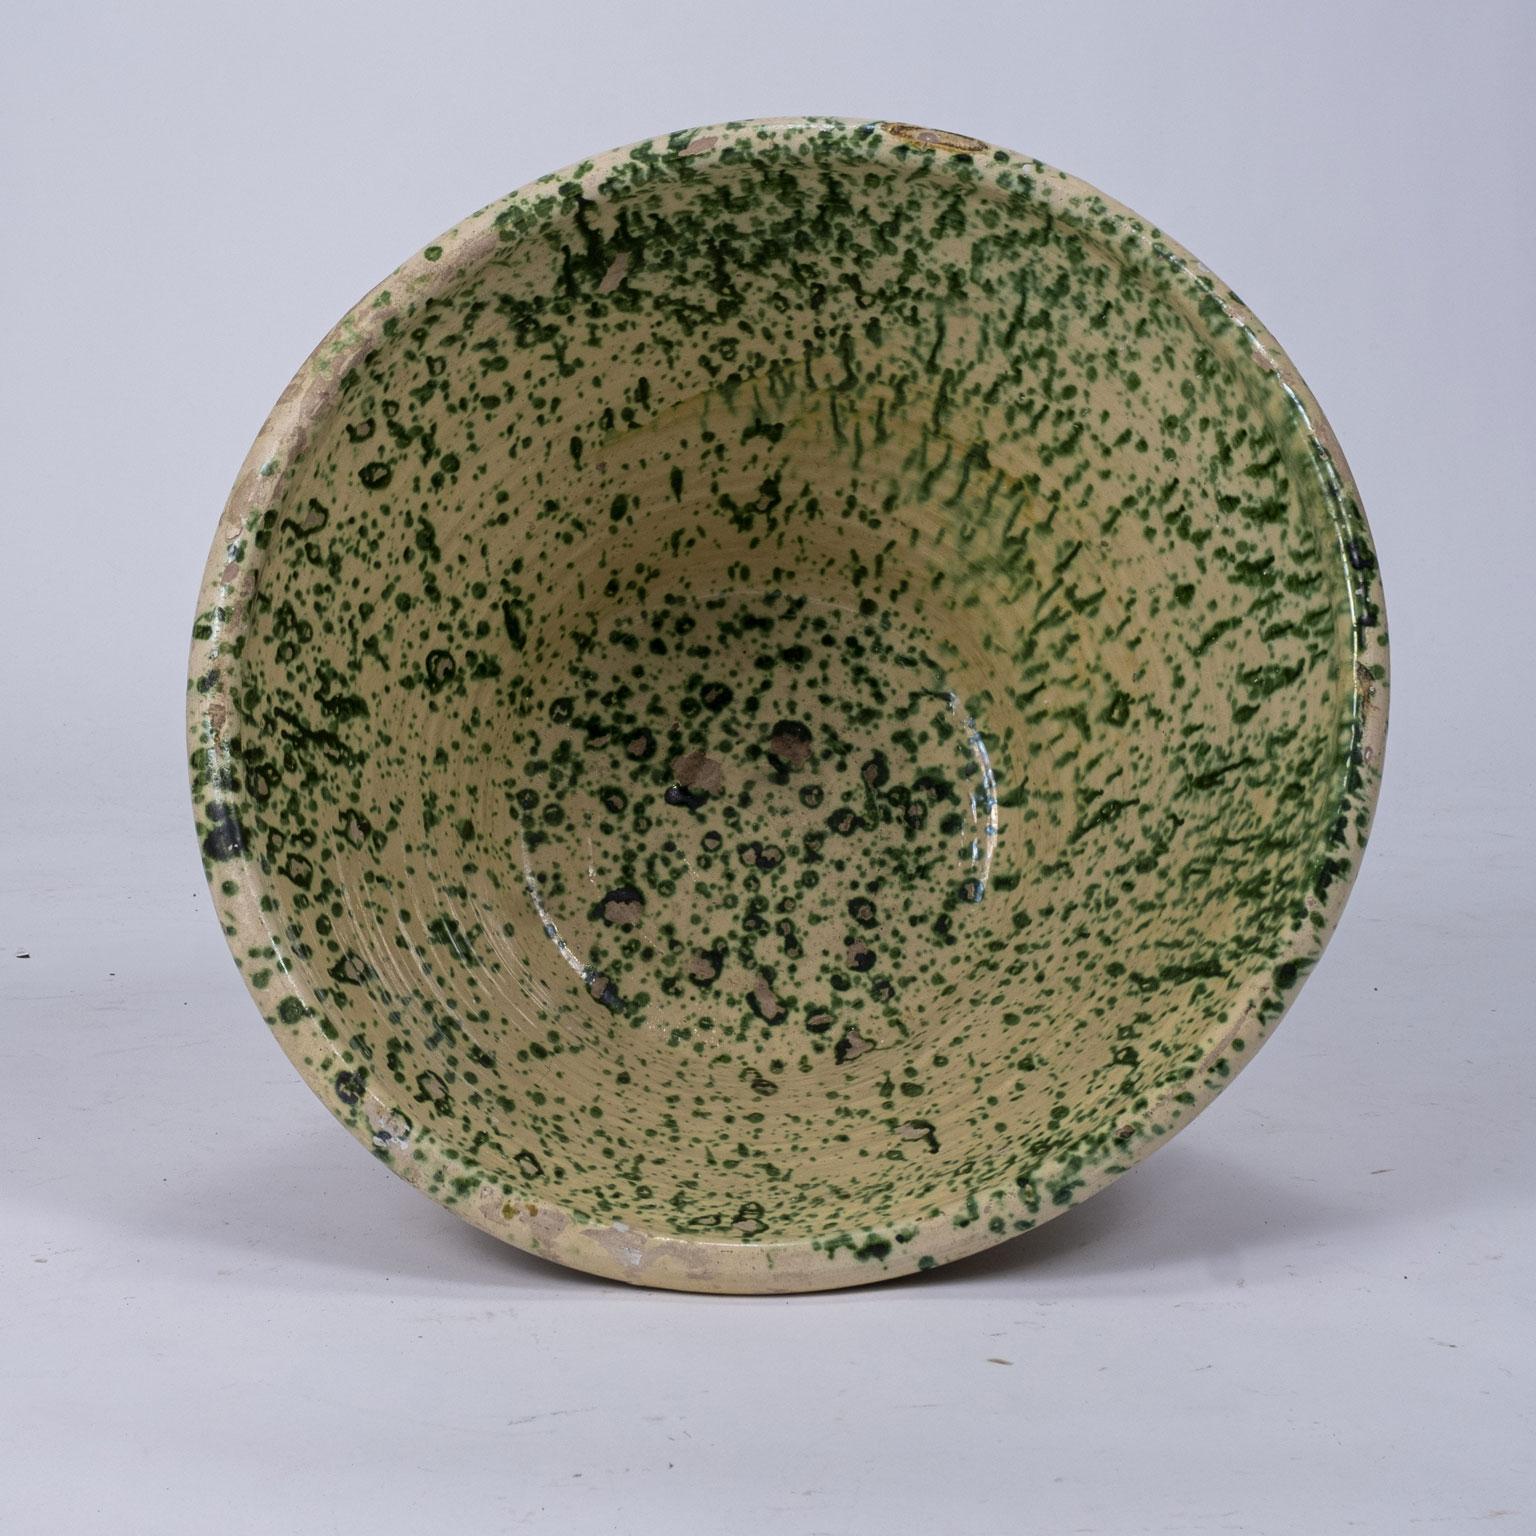 Large Colorful Glazed Terracotta Passata Bowl In Fair Condition For Sale In Houston, TX